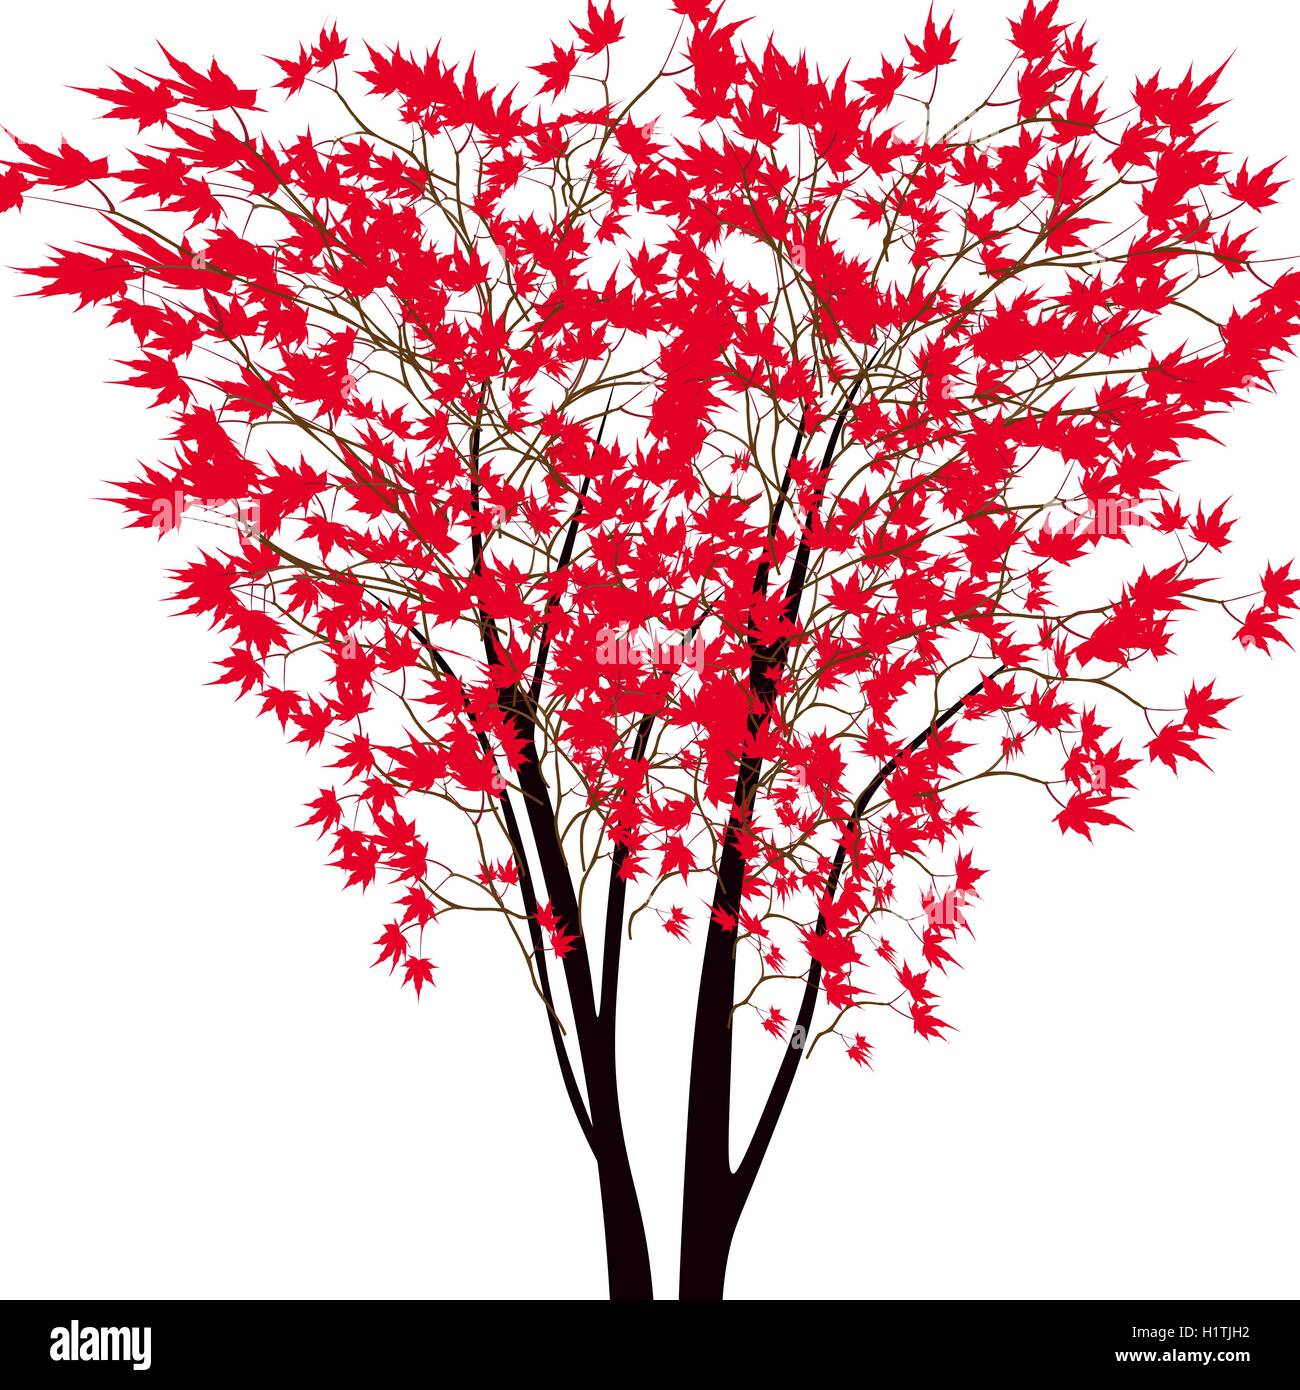 Card with autumn maple tree. Red maple trees in the middle. Japanese red maple. Stock Vector